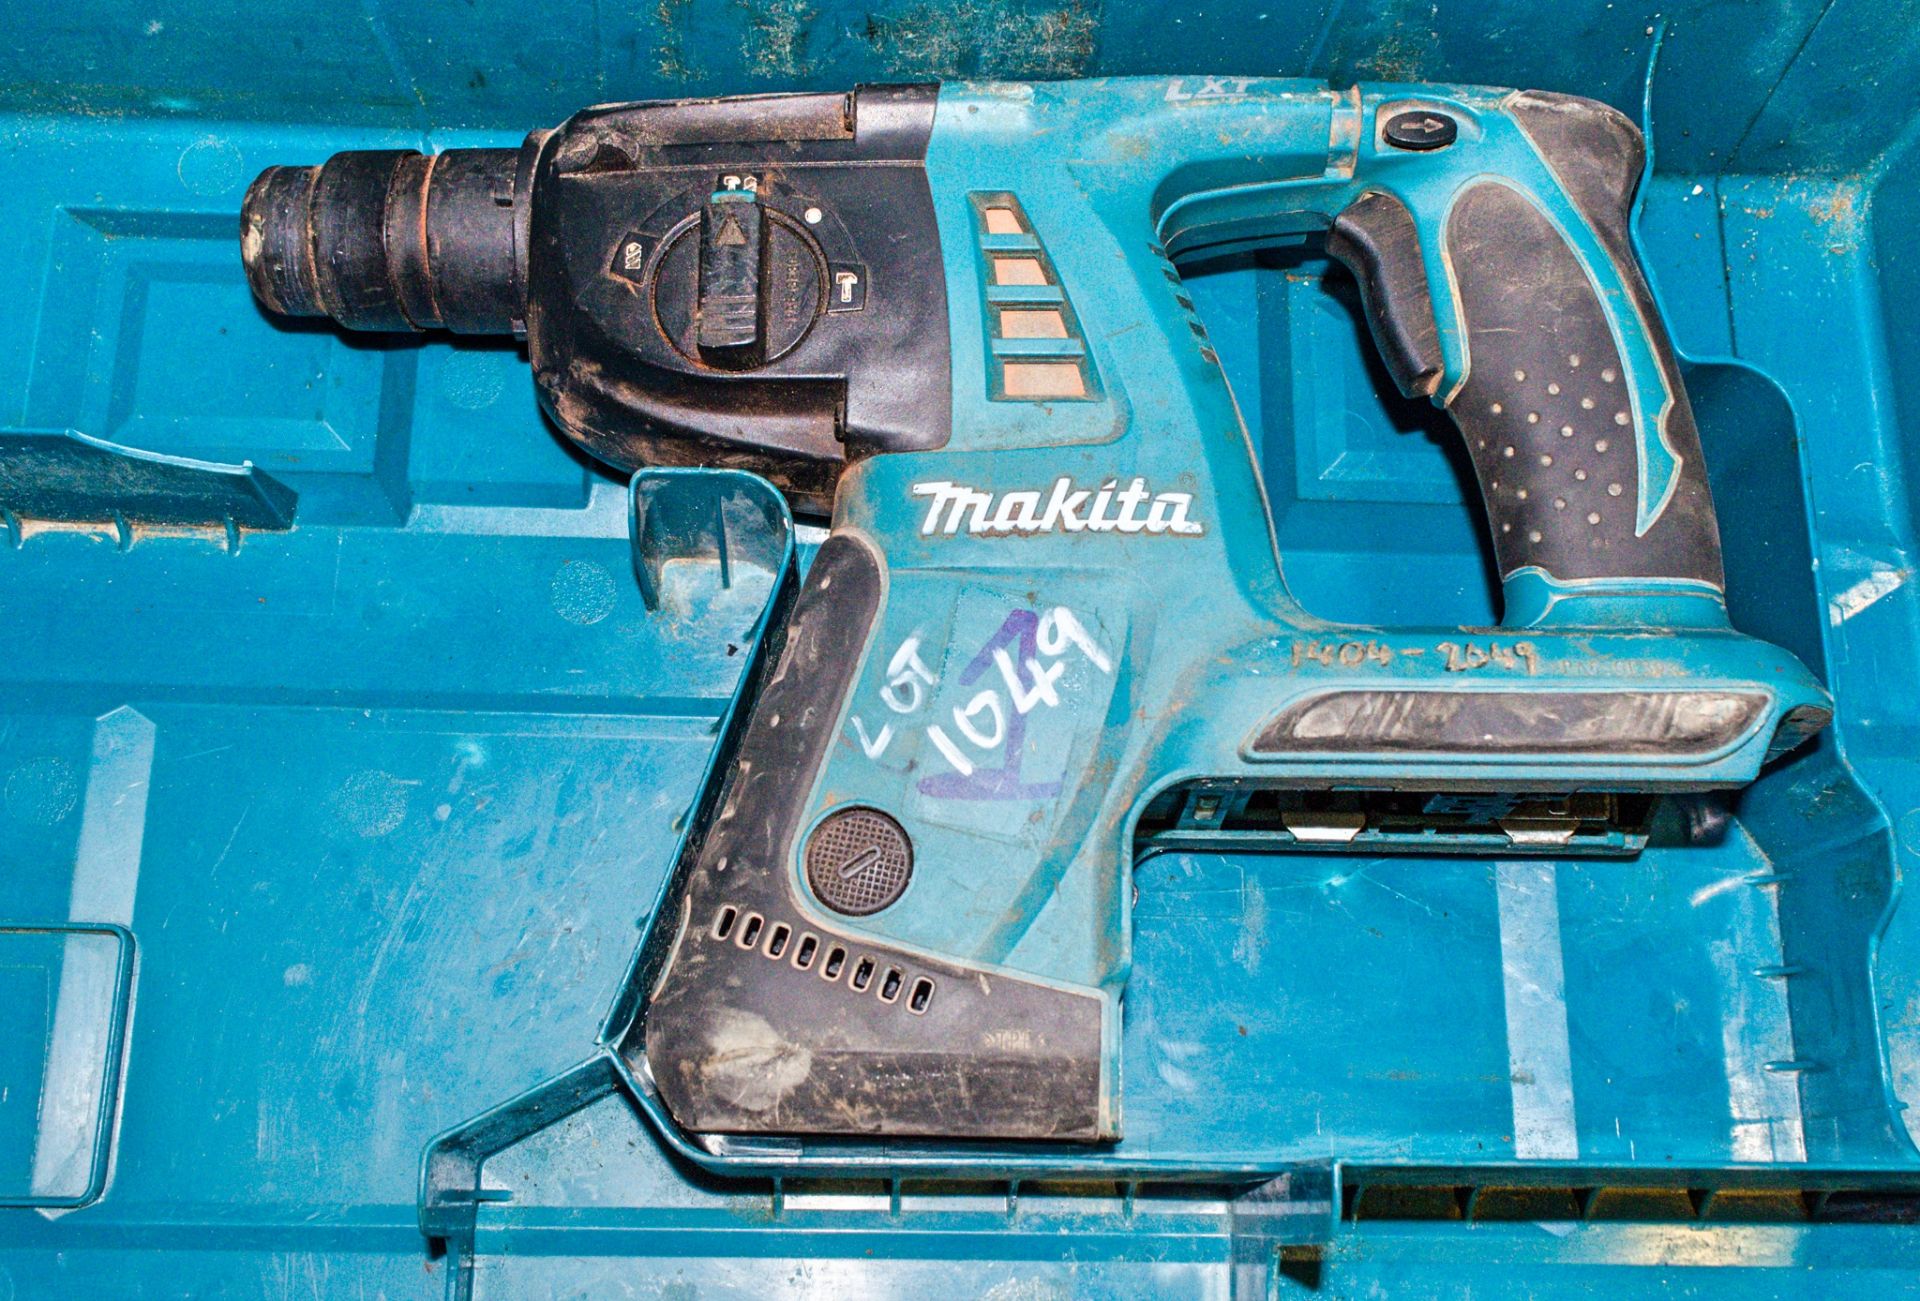 Makita cordless SDS rotary hammer drill  c/w carry case  ** No charger or battery **